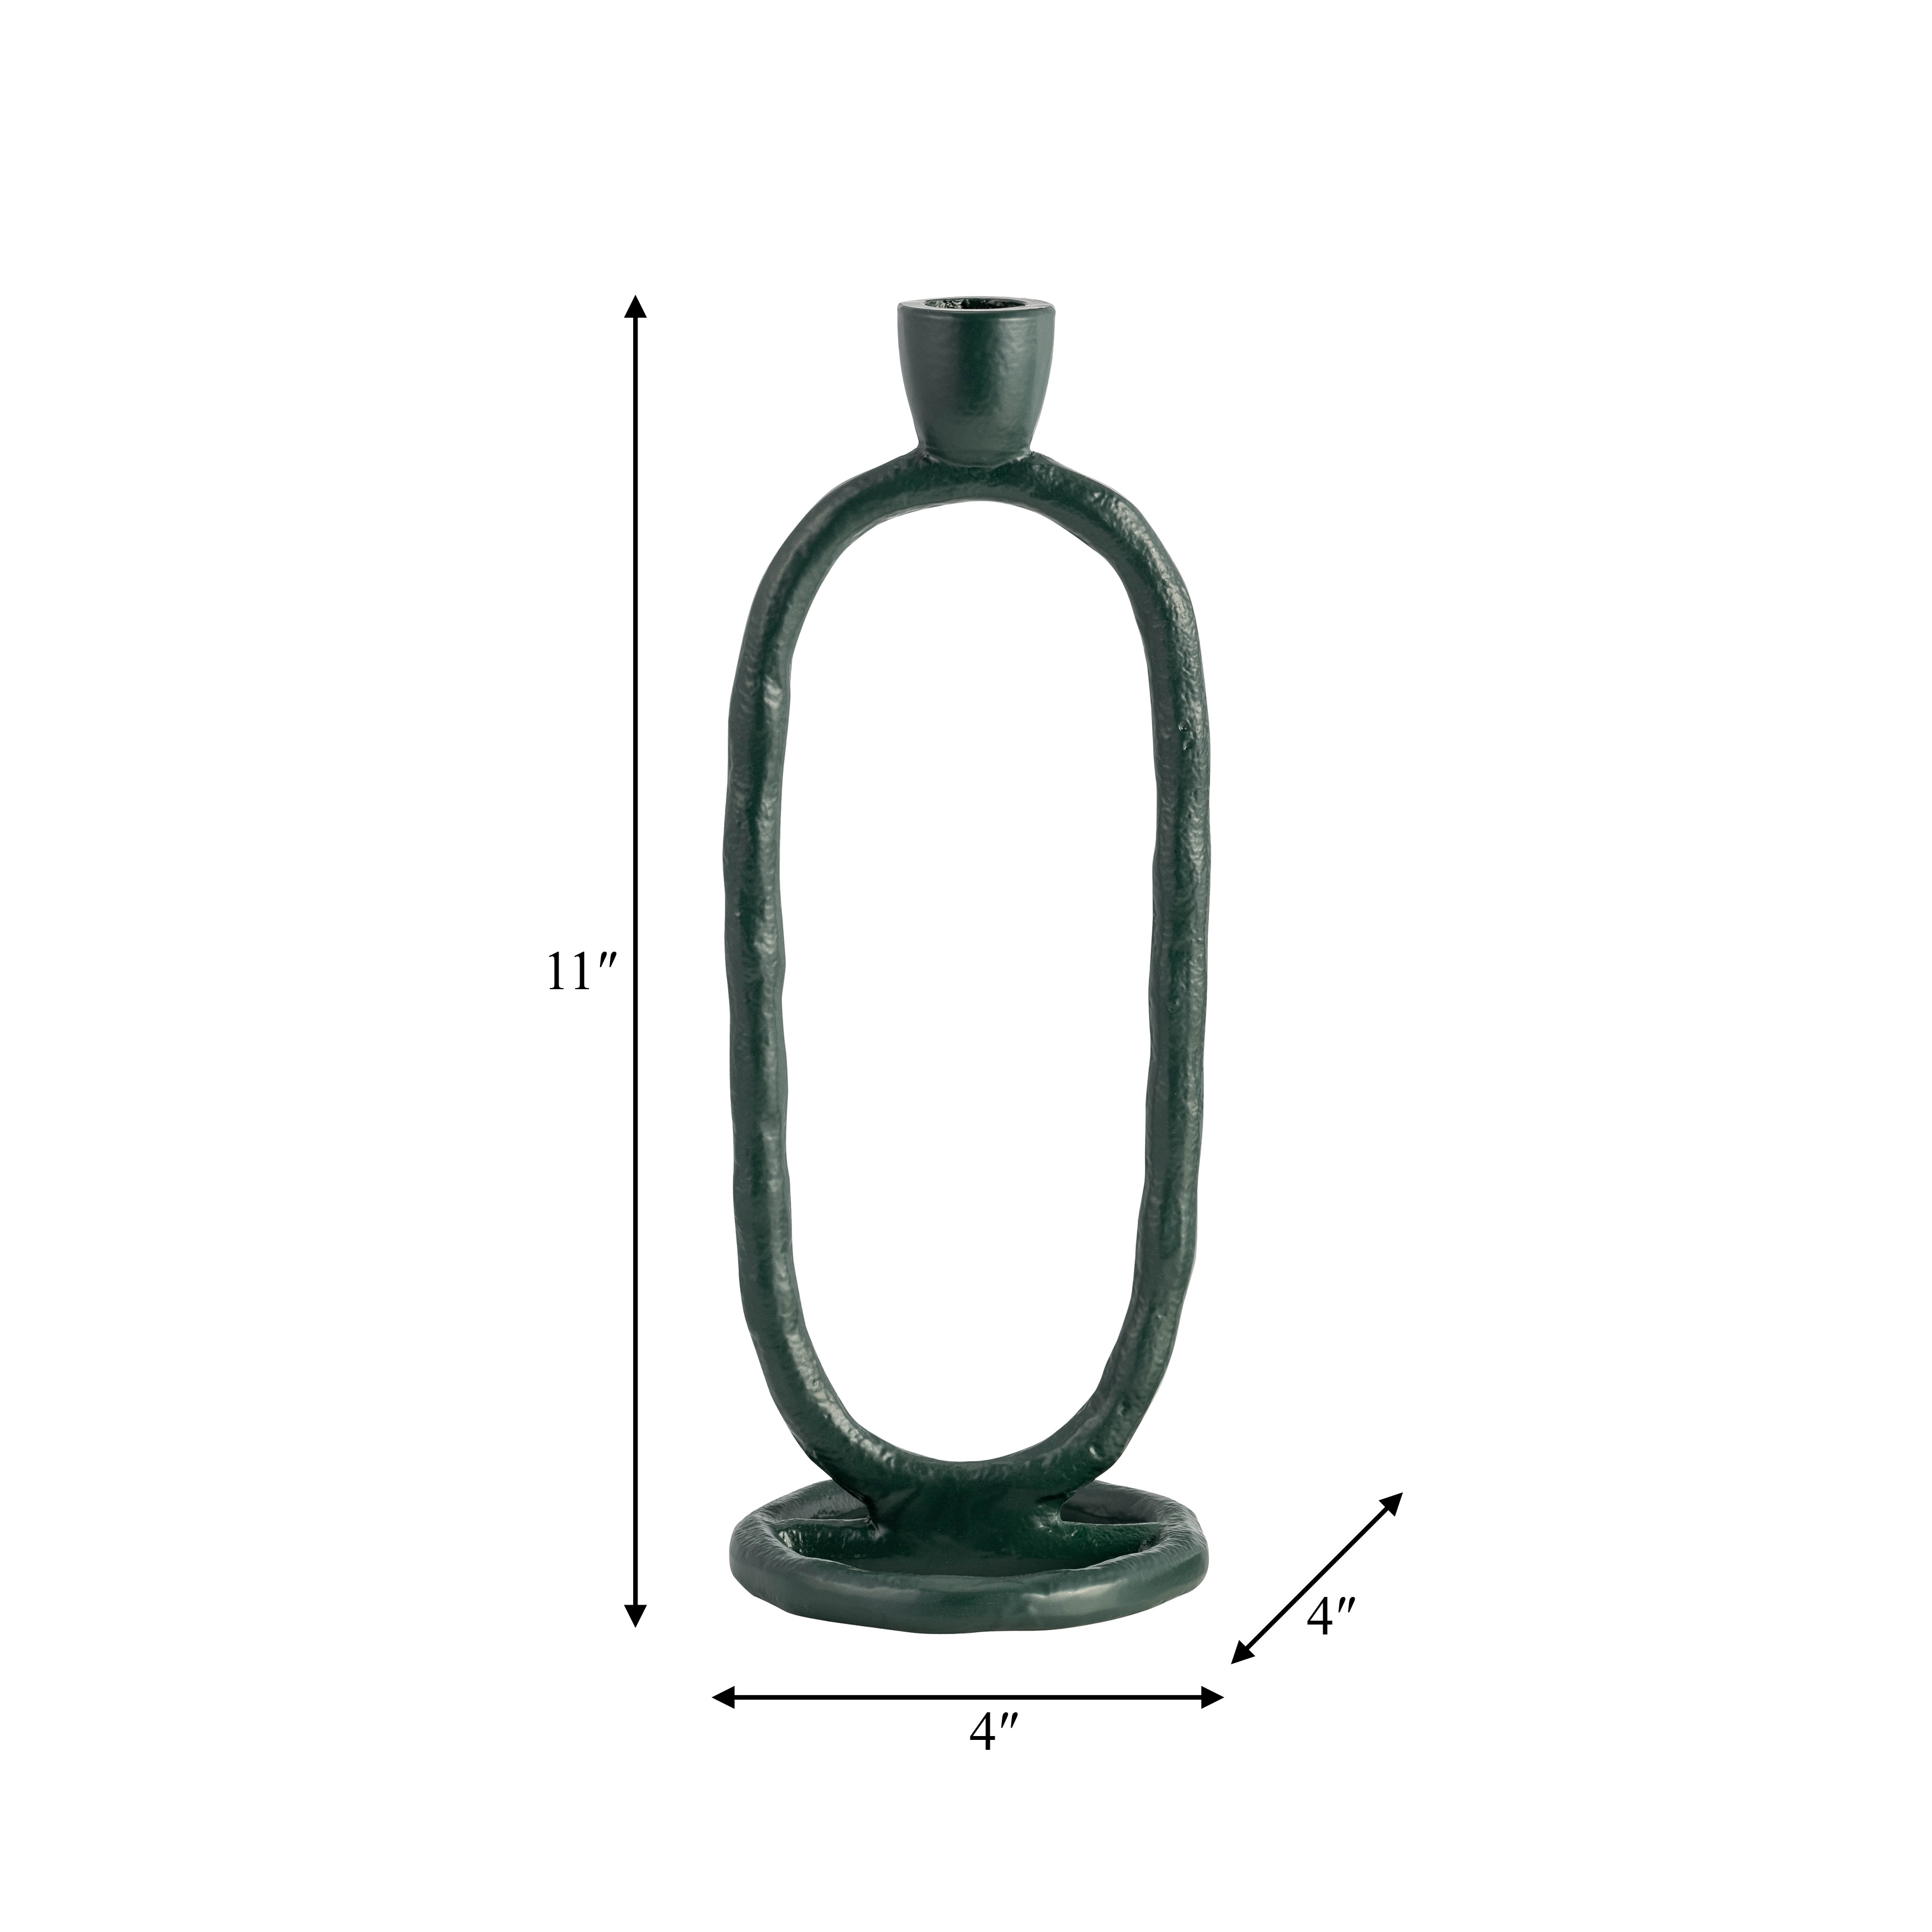 11" Oval Ring Taper Candle Holder Contemporary Dark Green Abstract Metal Candle Display for Home or Office Decor -